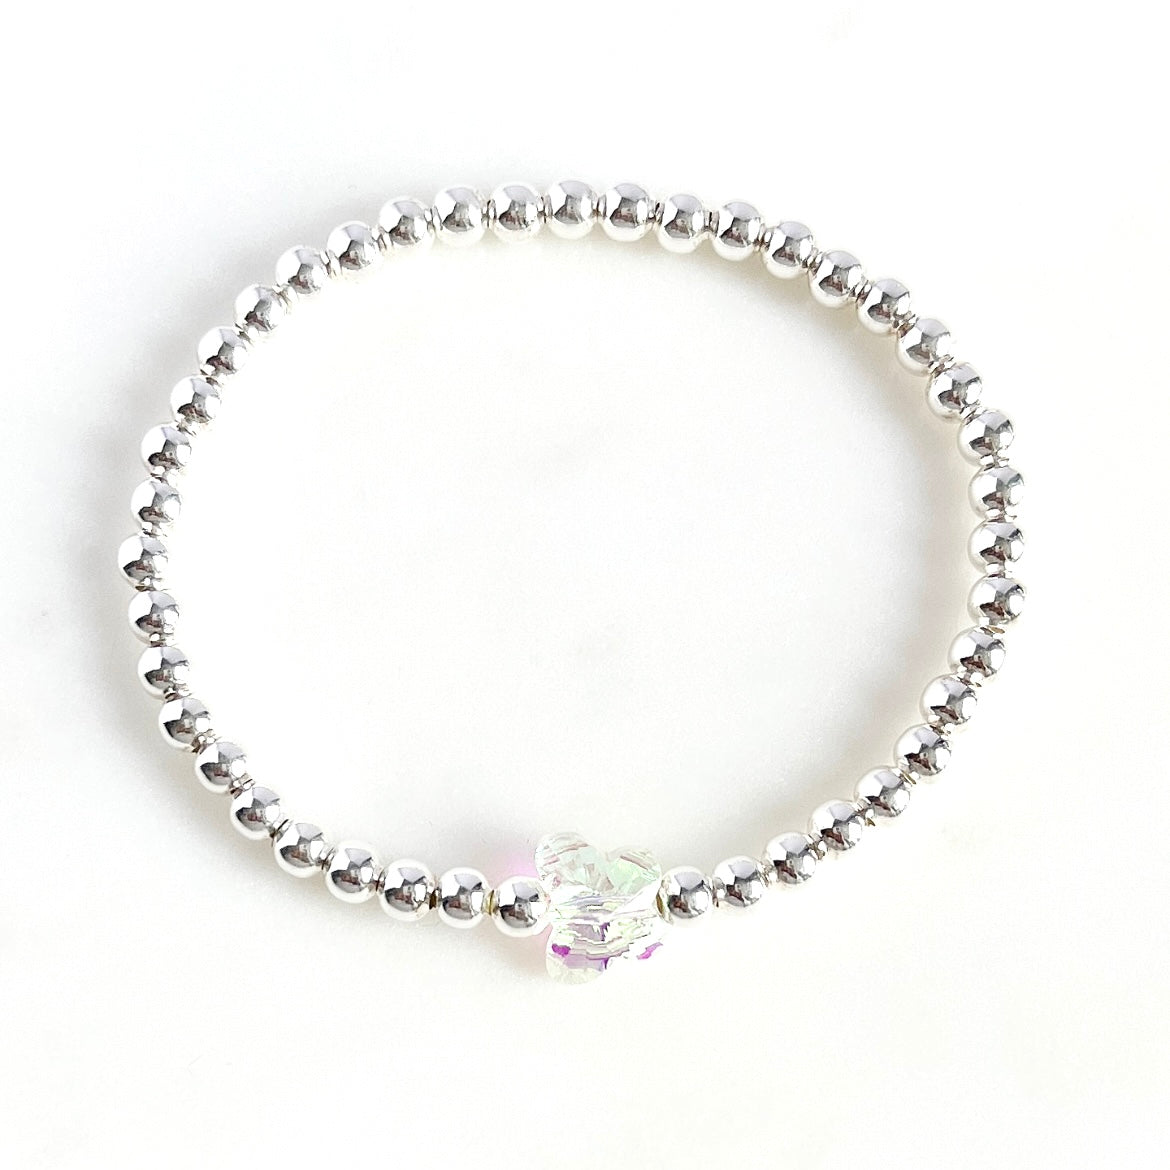 Portraits of Nature butterfly bracelet in white gold | De Beers UK